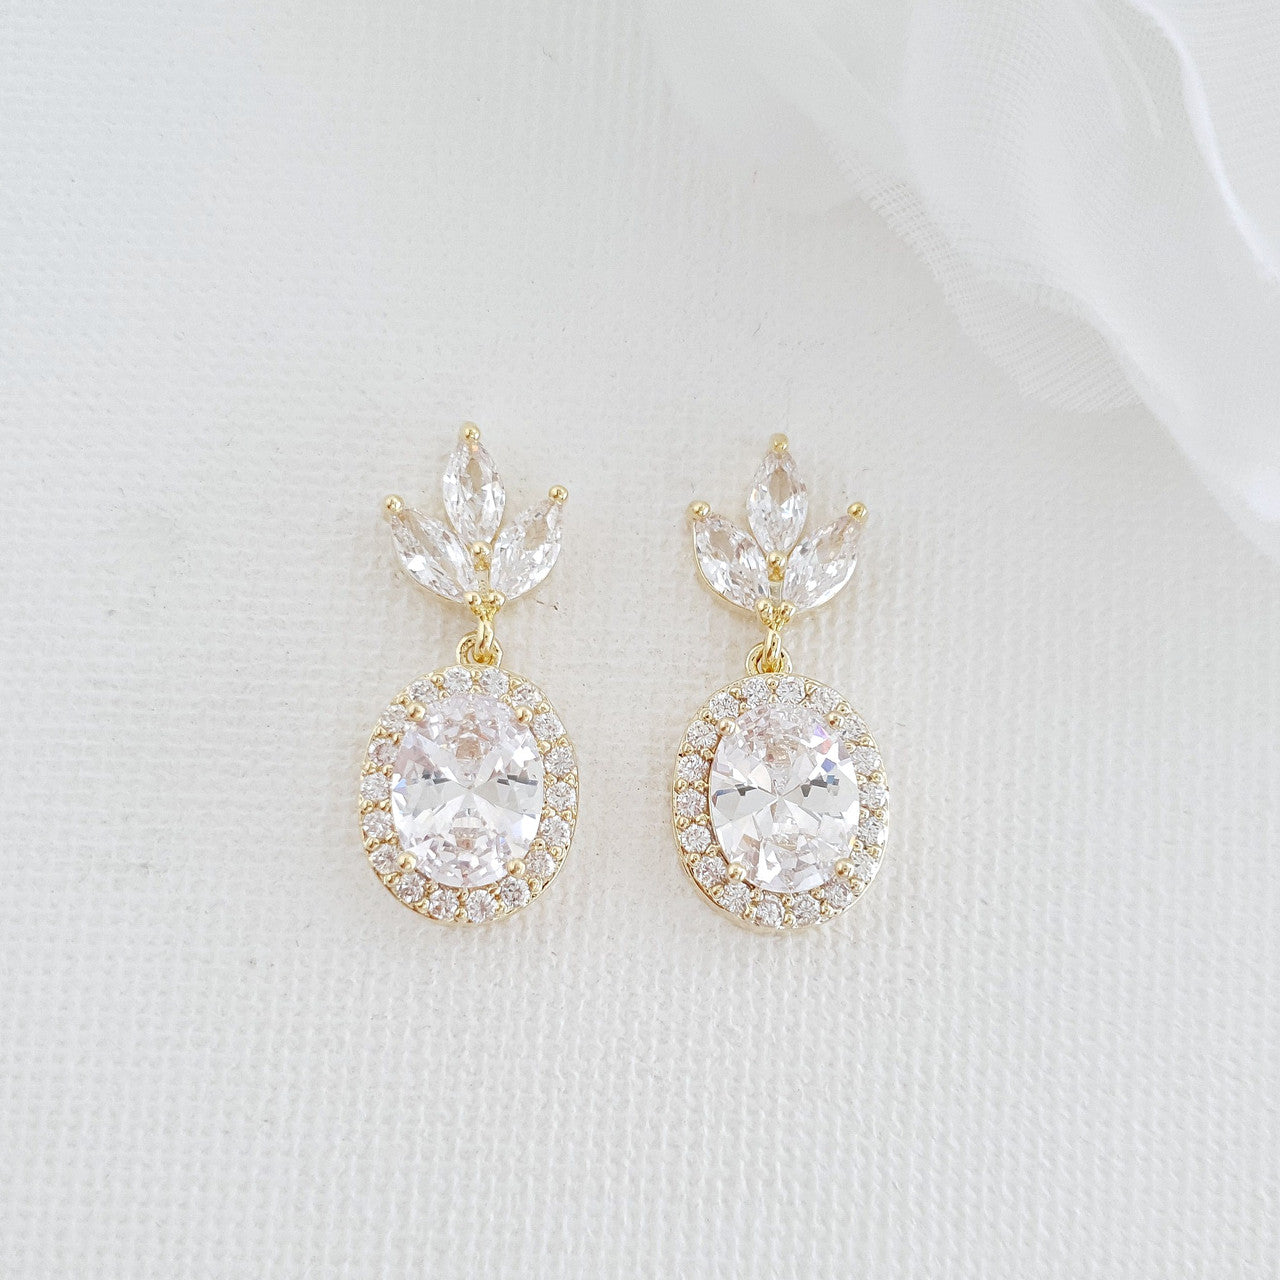 Small Bridal Earrings With Oval Crystals & Rose Gold- Emily